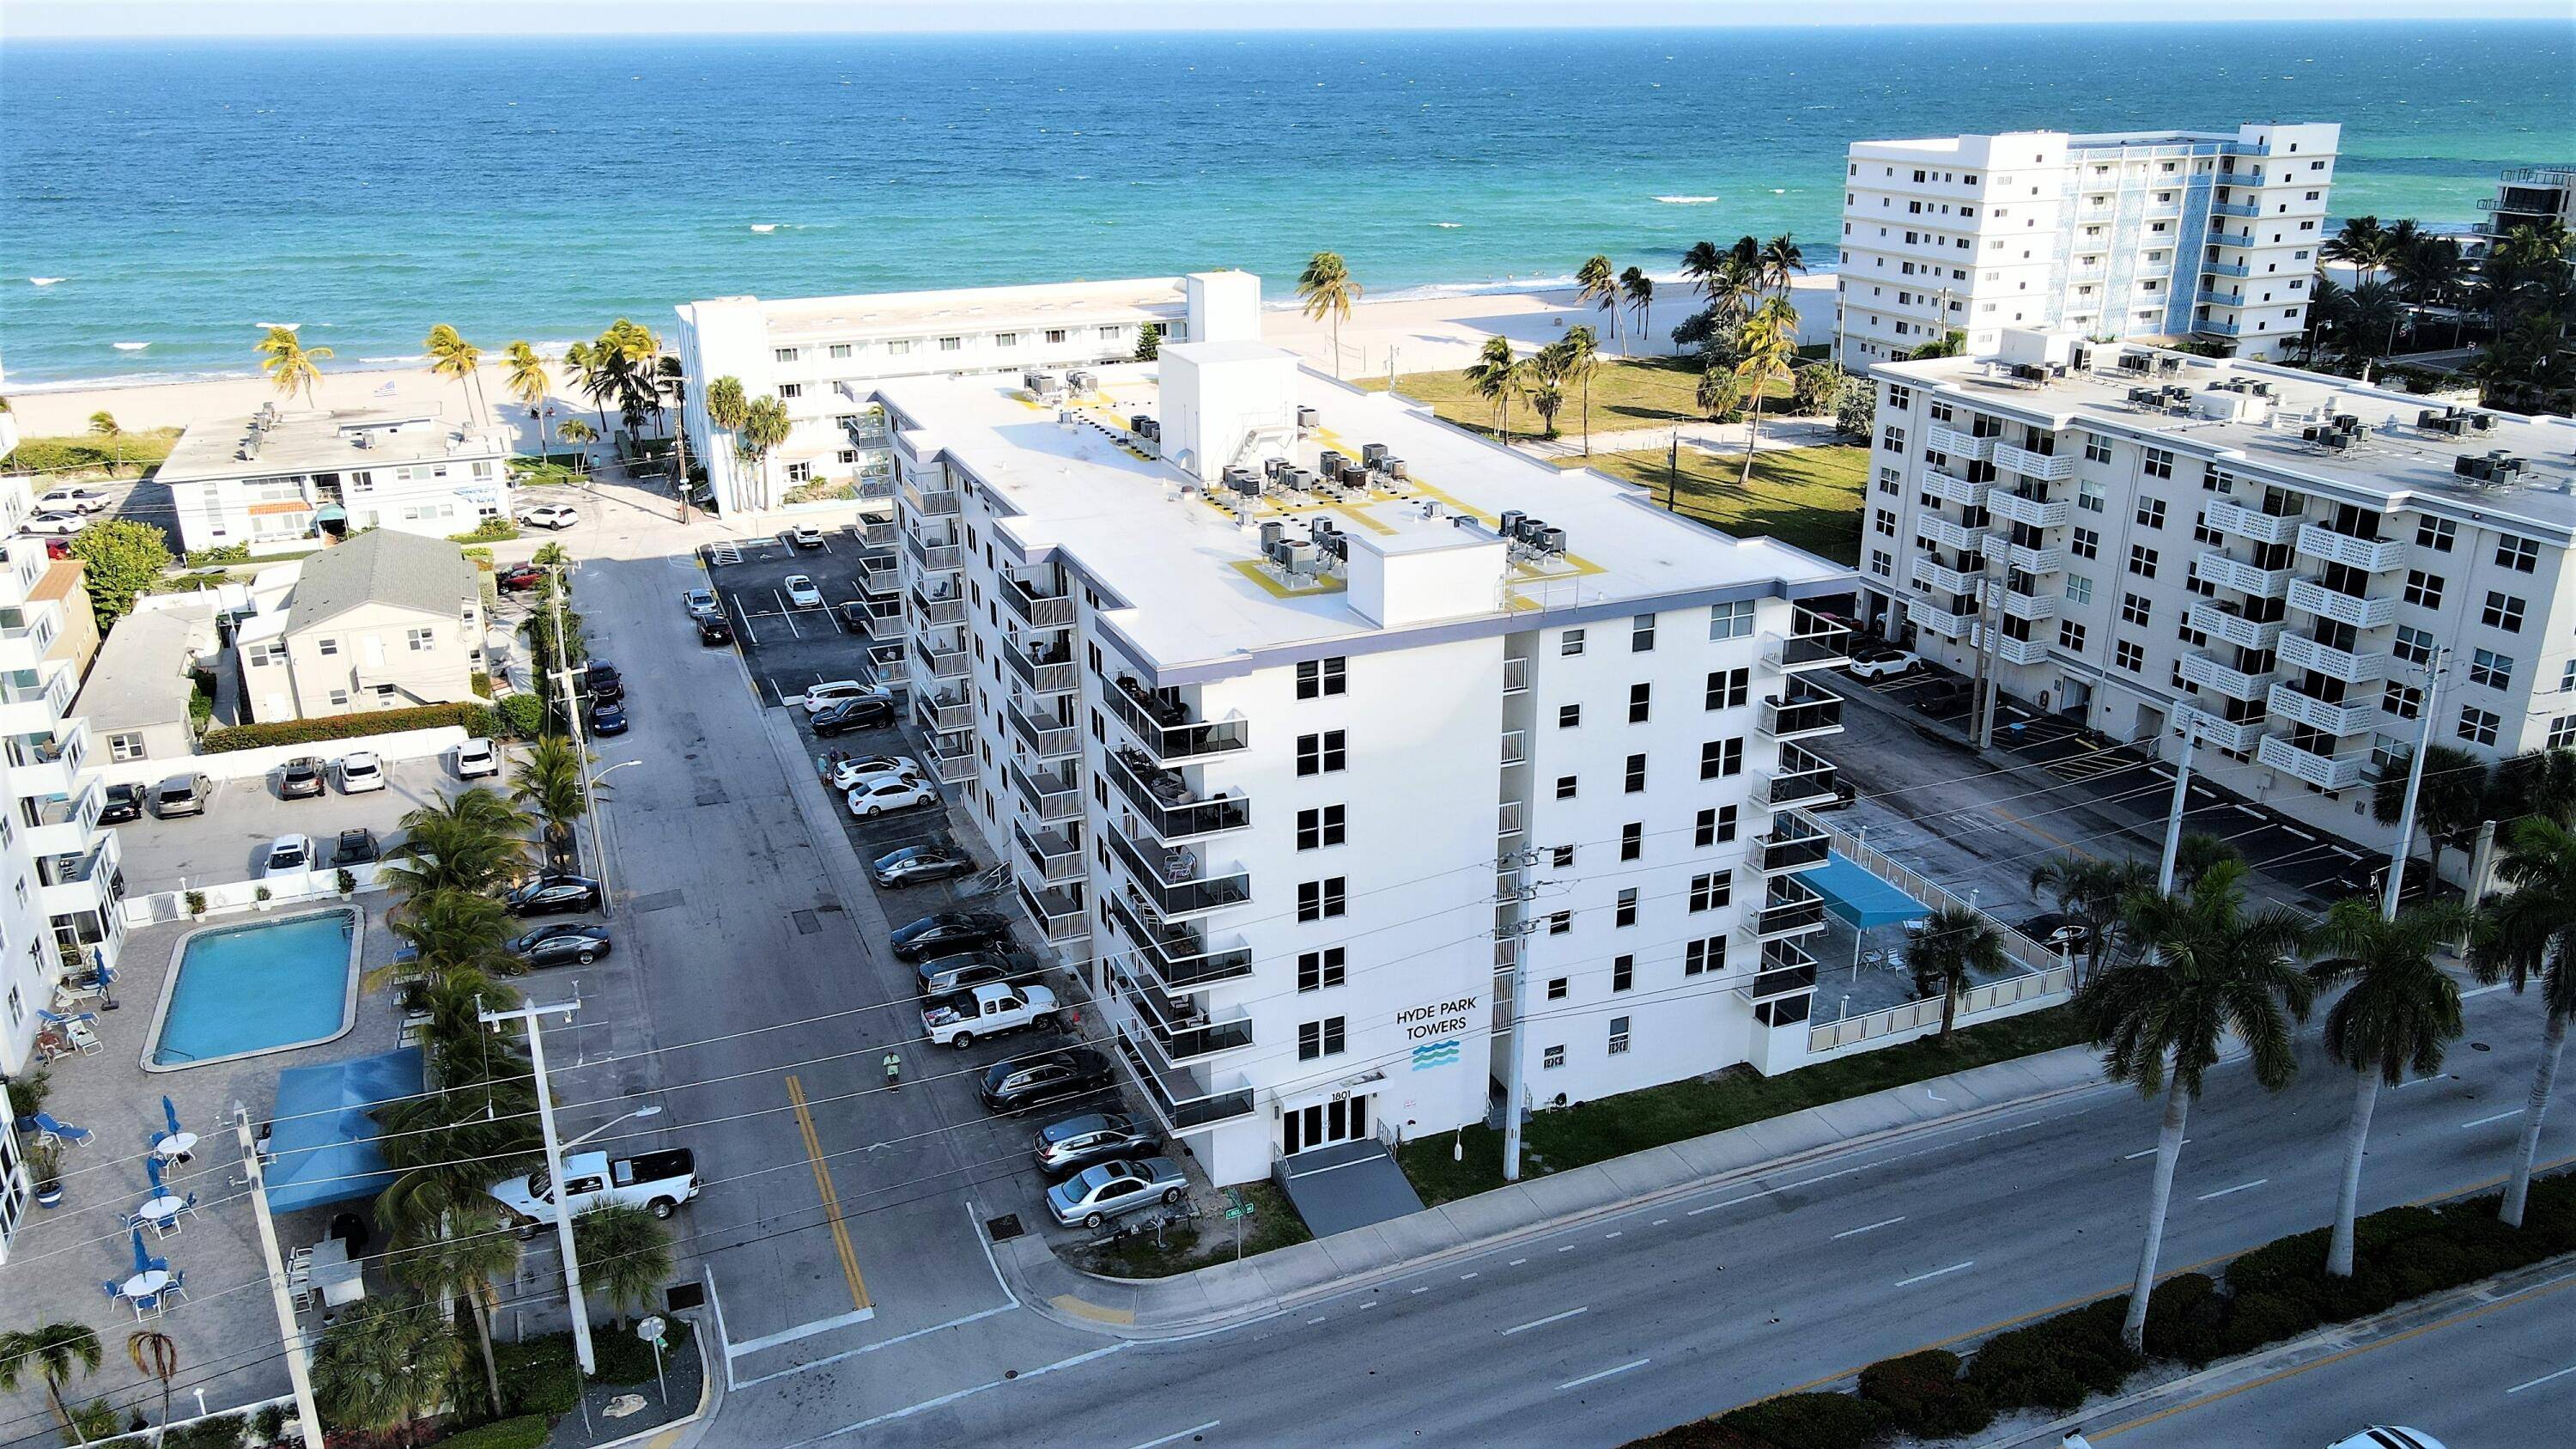 BEAUTIFULLY RENOVATED 1 AND 1 2 BATH ONE BLOCK FROM THE OCEAN WITH STUNNING BEACH AND WATER VIEWS FROM THE UNIT.